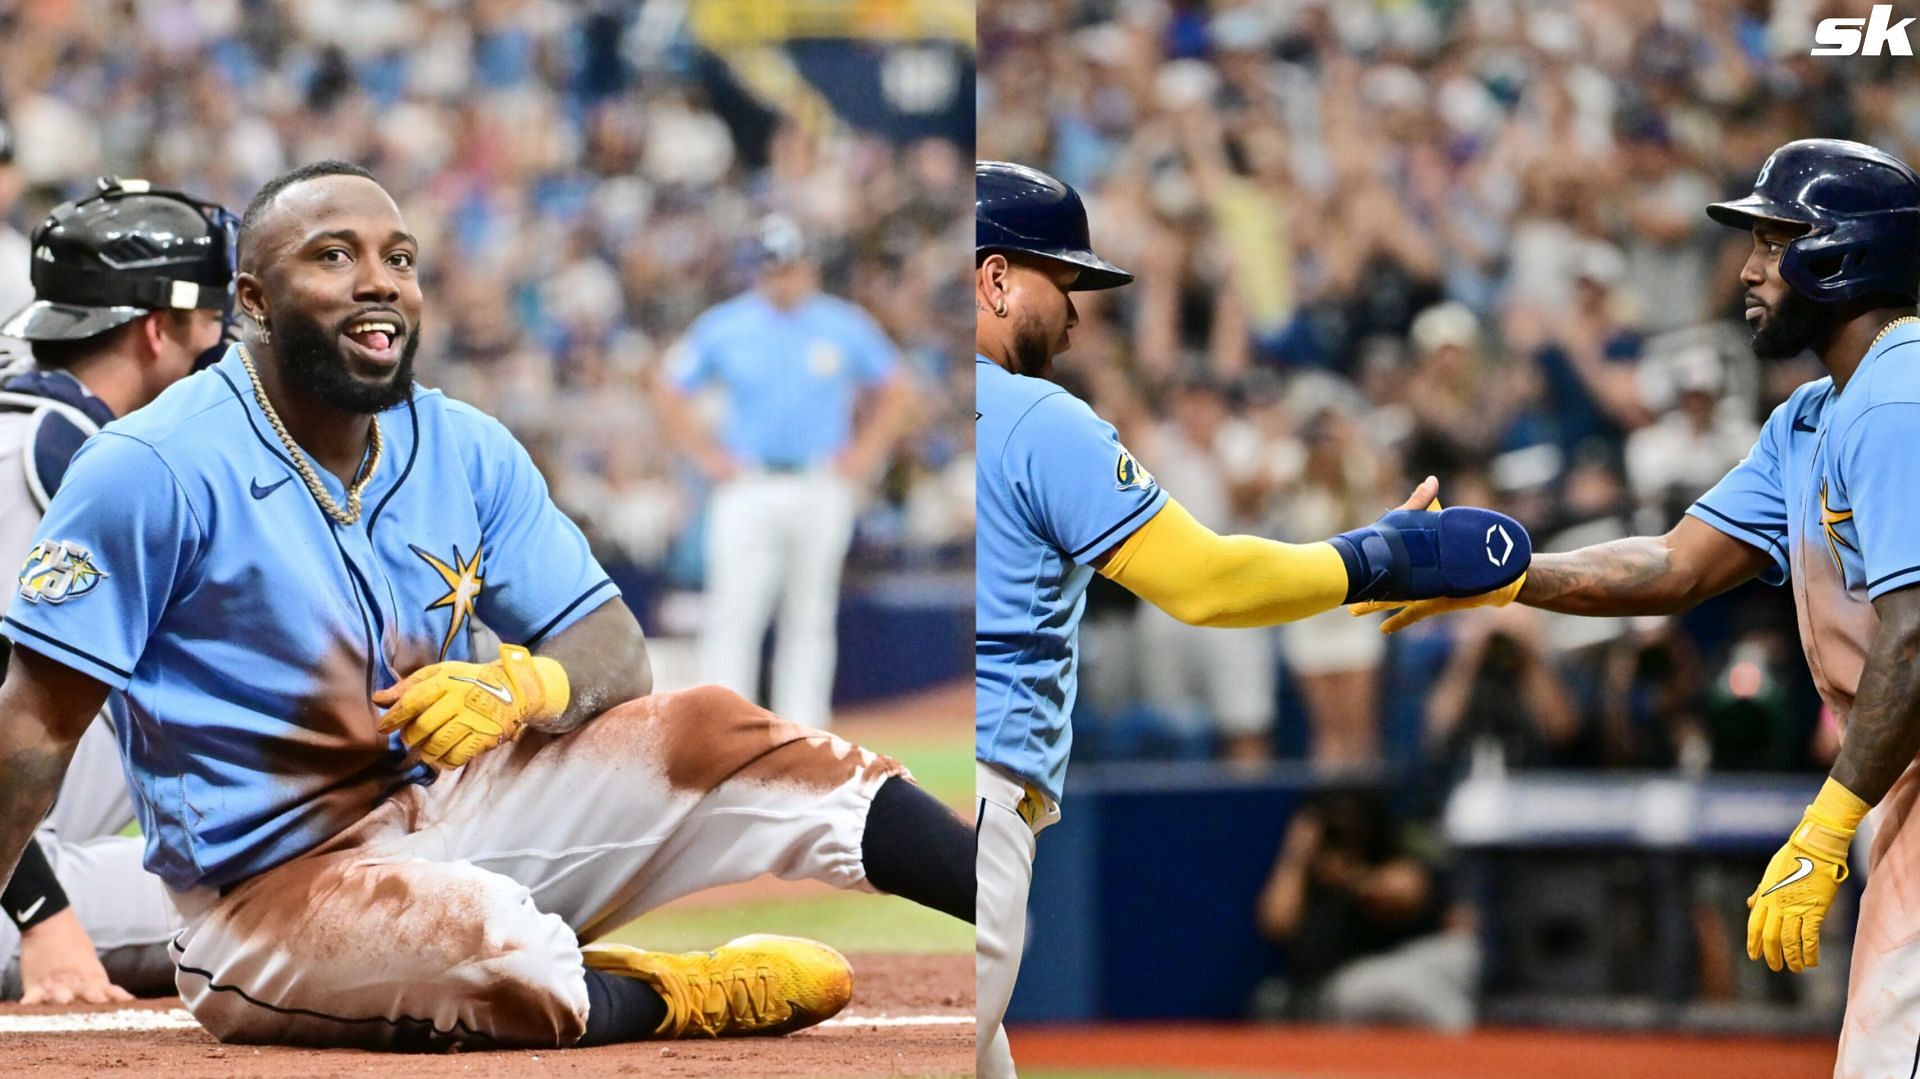 Randy Arozarena was the talking point in the Rays-Yankees game on Sunday